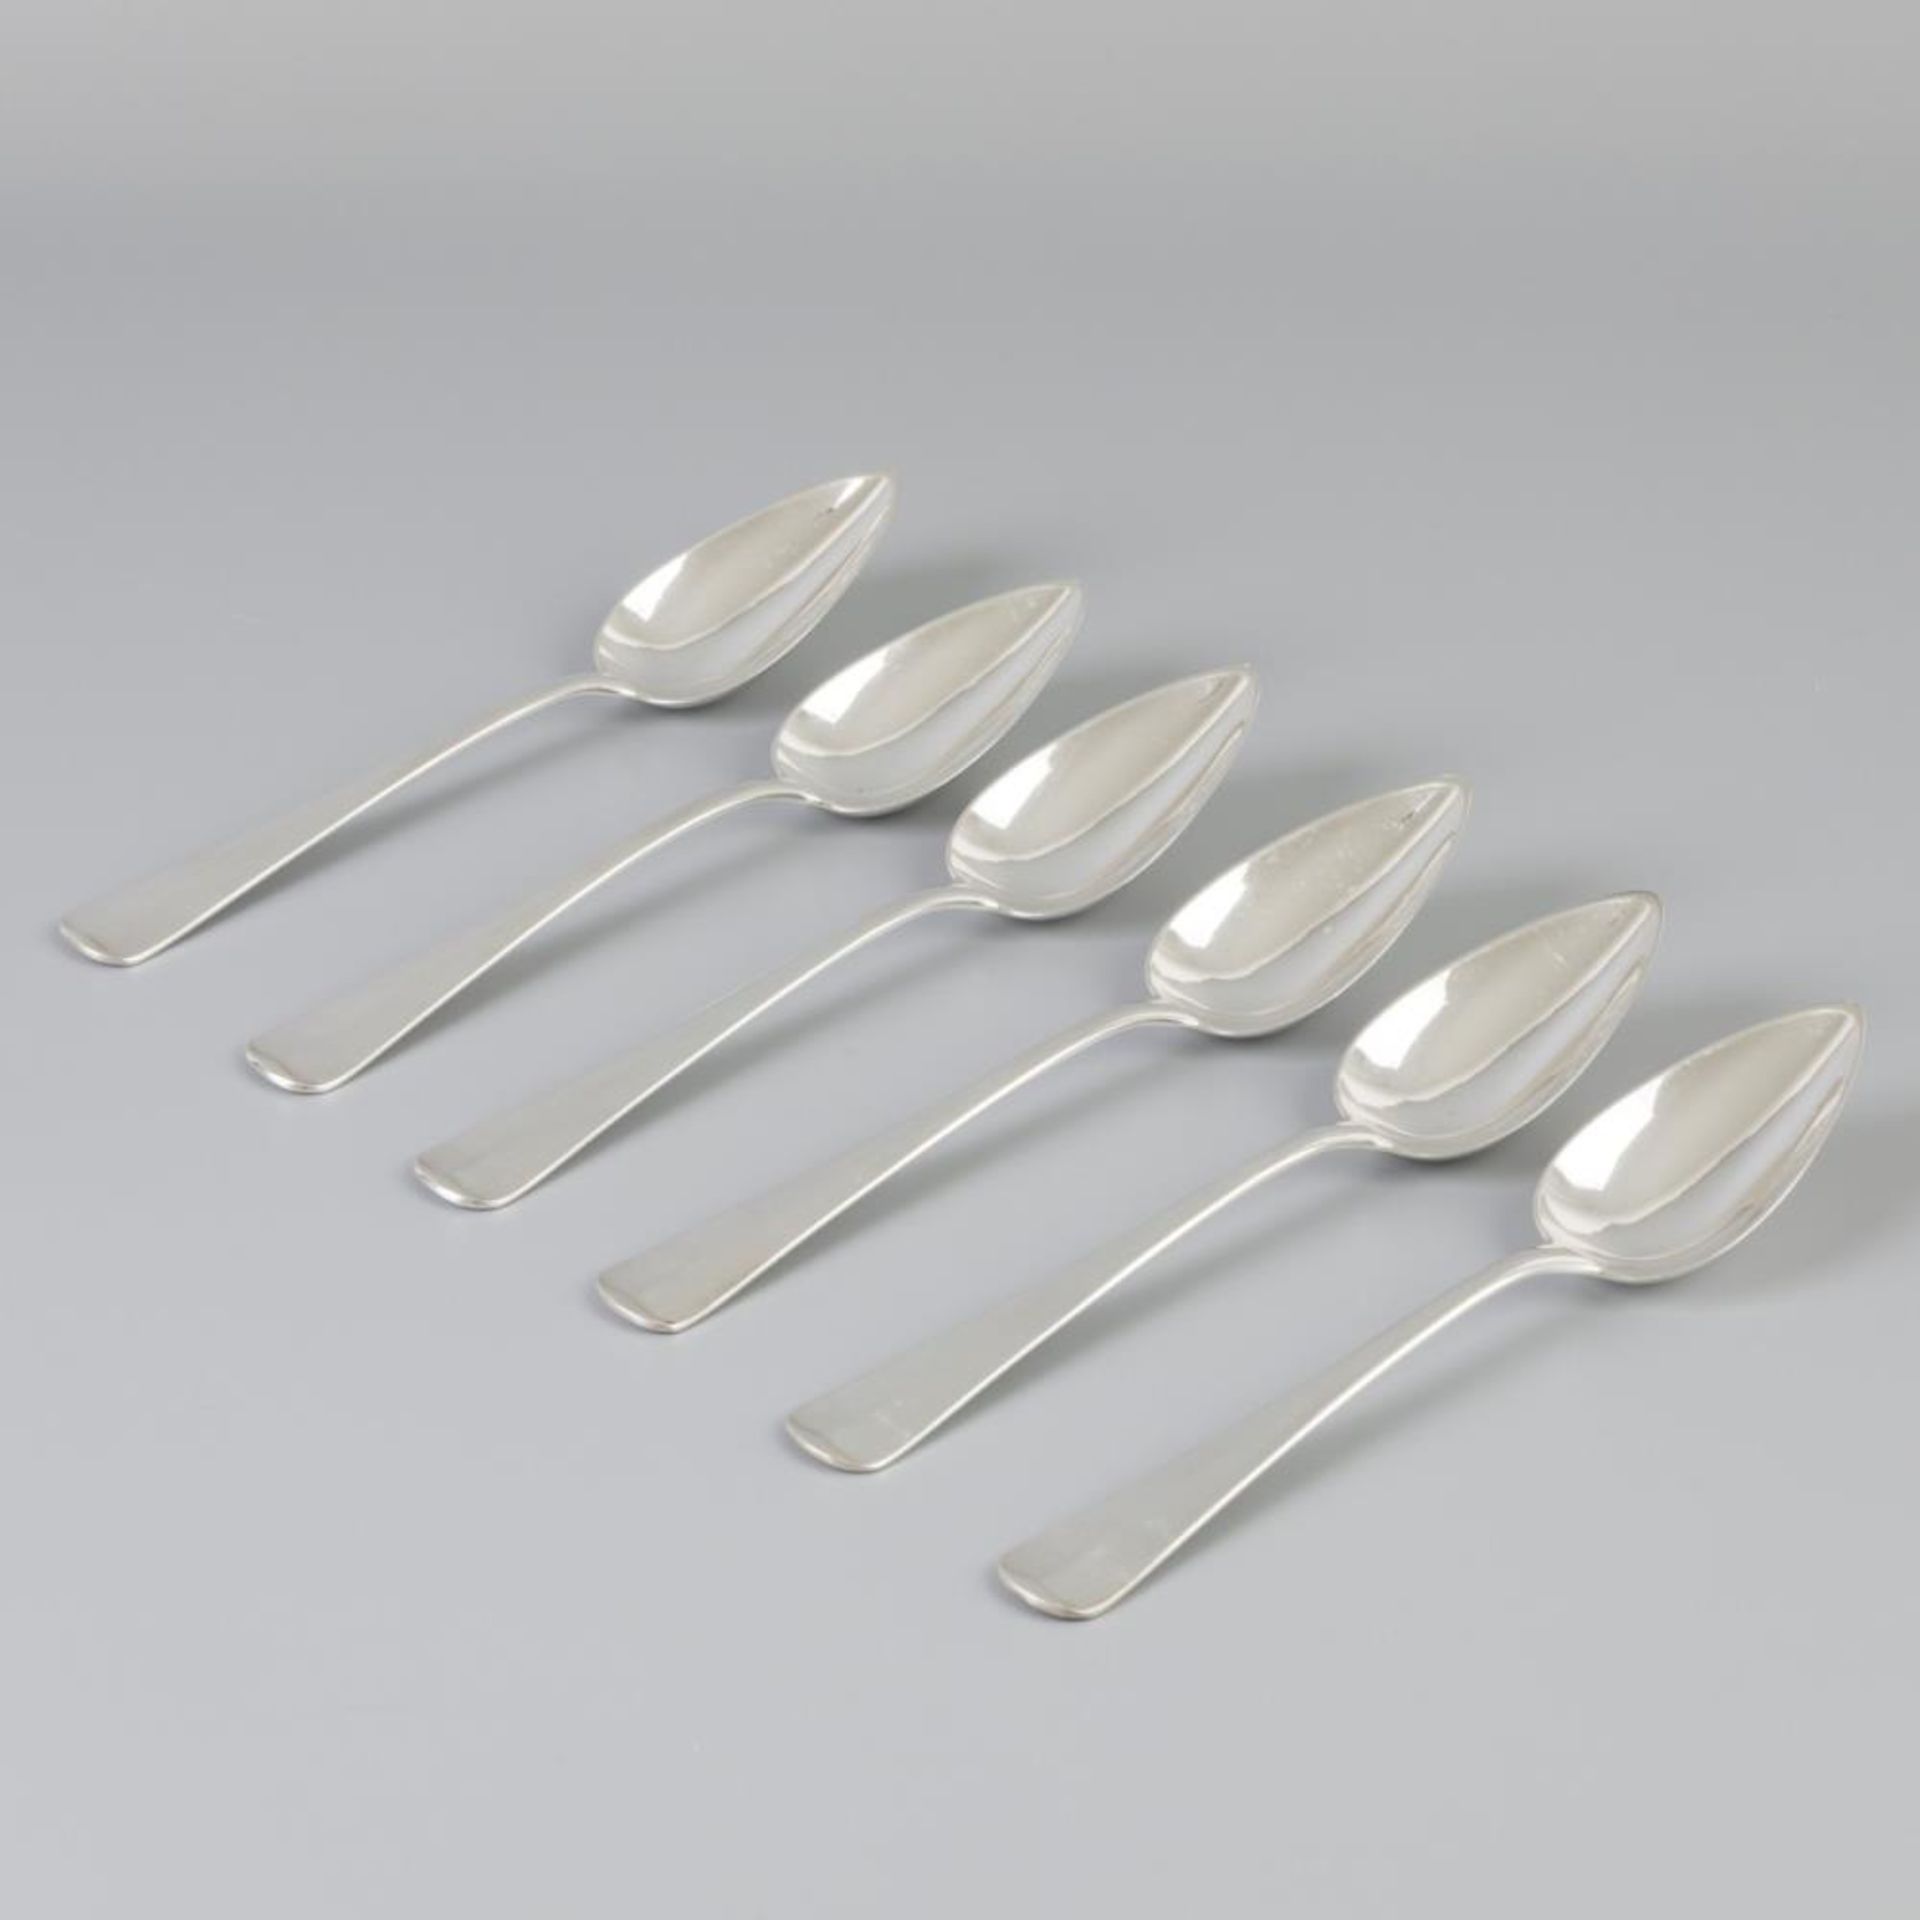 6 piece set dinner spoons "Haags Lofje" silver.